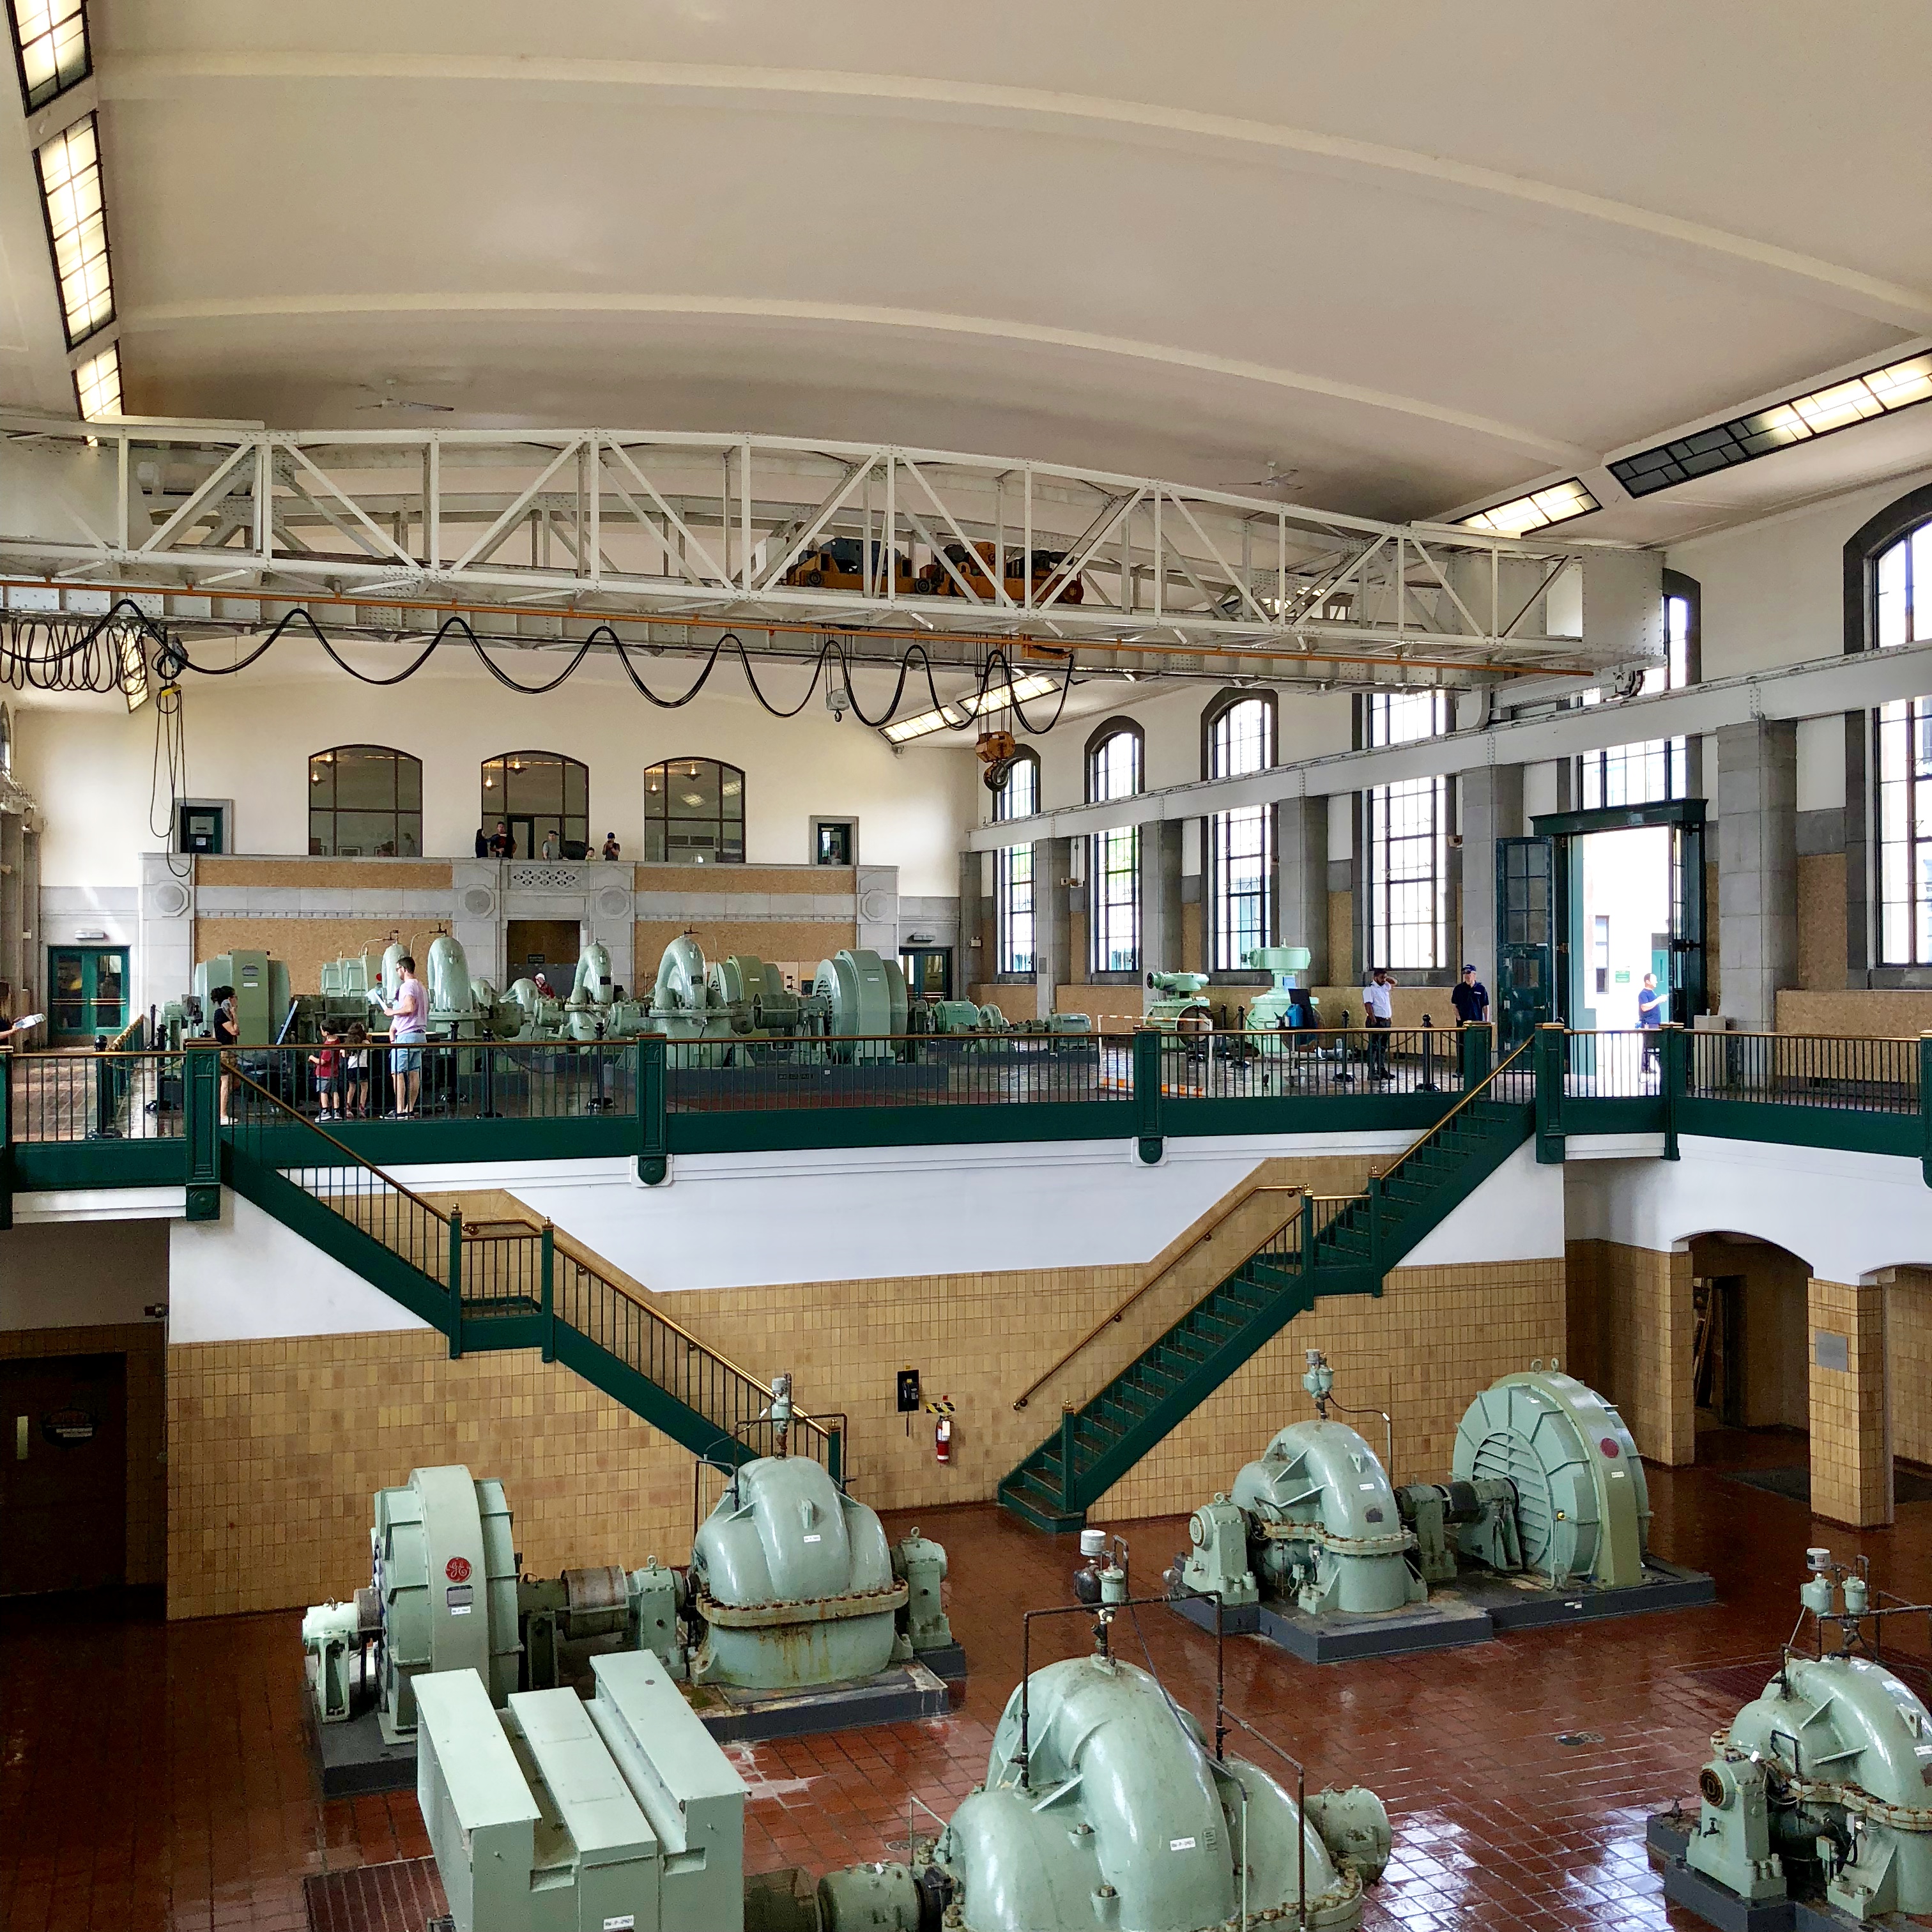 Interior view of the main pumping room of the H.C. Harris water treatment plant of Toronto